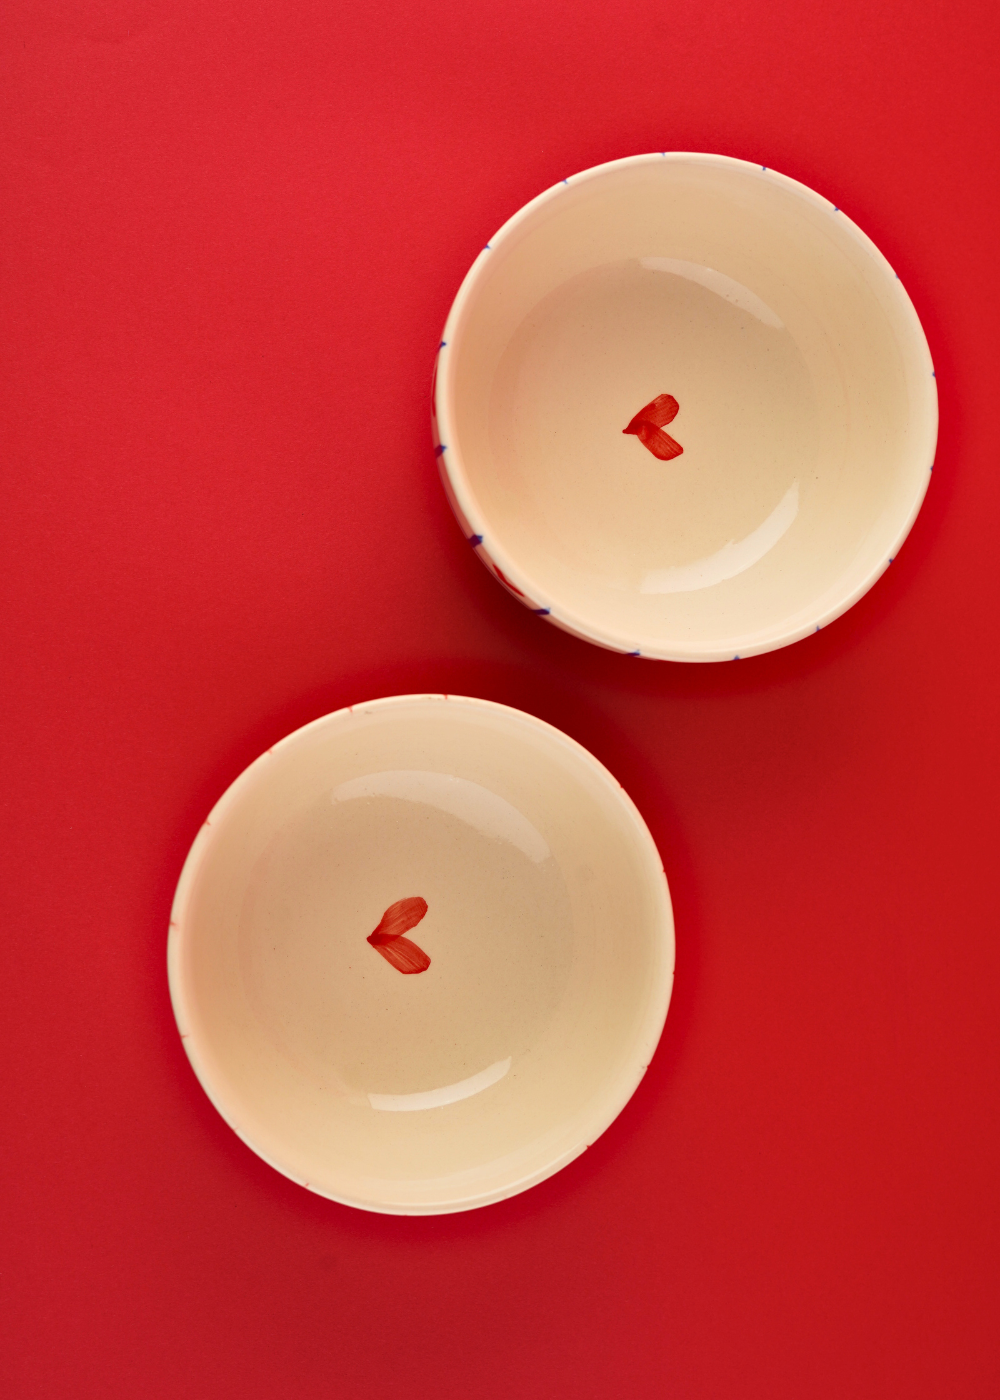 red heart in his & her bowls set of two, combo